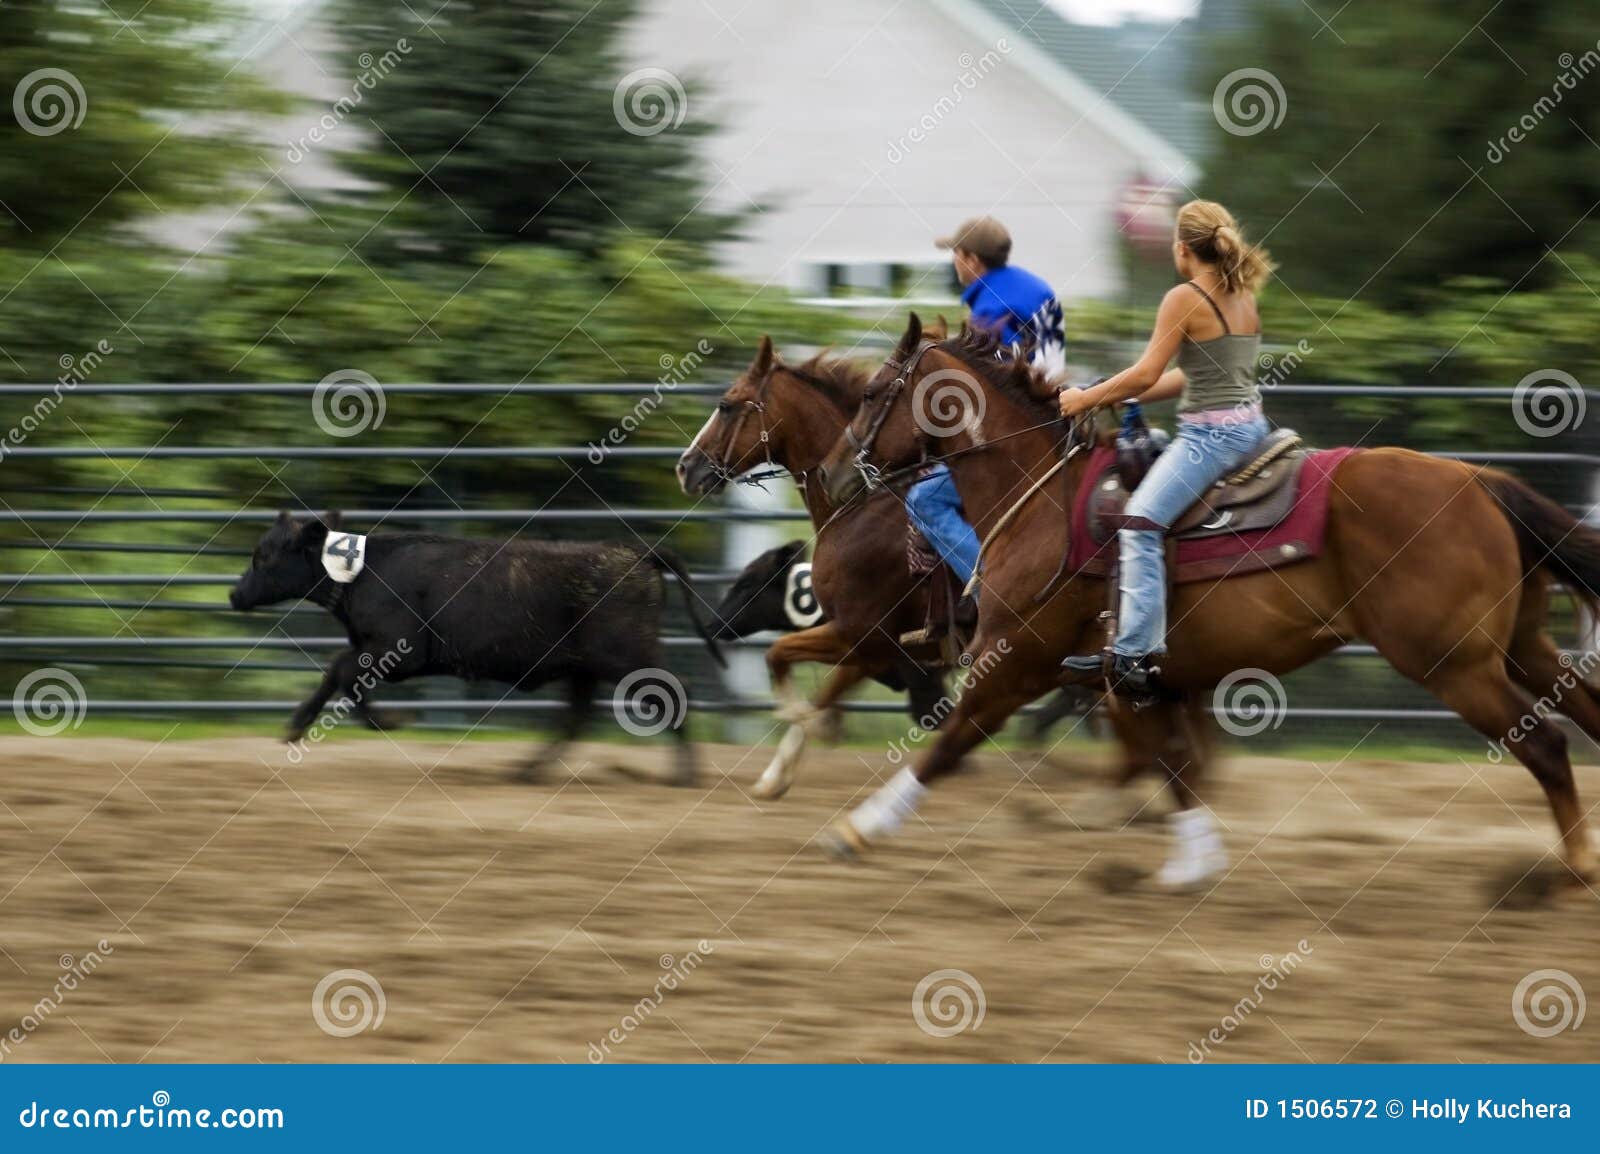 young cowhands rodeo panning and motion blur